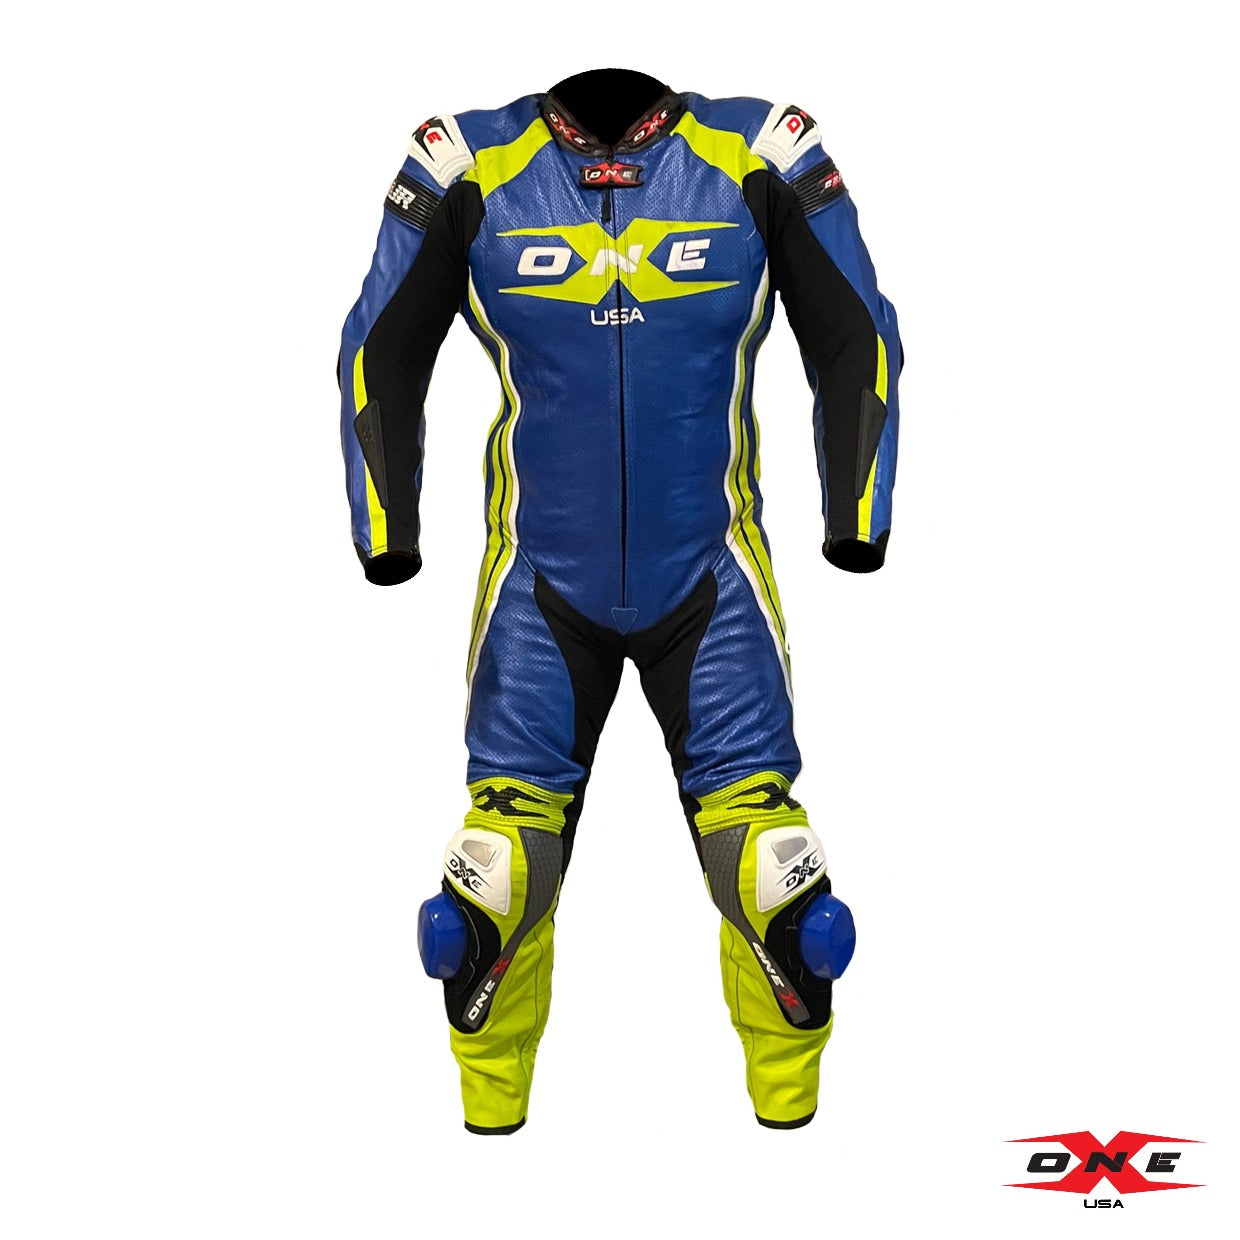 OneX USA XR22 Airbag Ready Pro Race Suit - Blue/Fluor Yellow